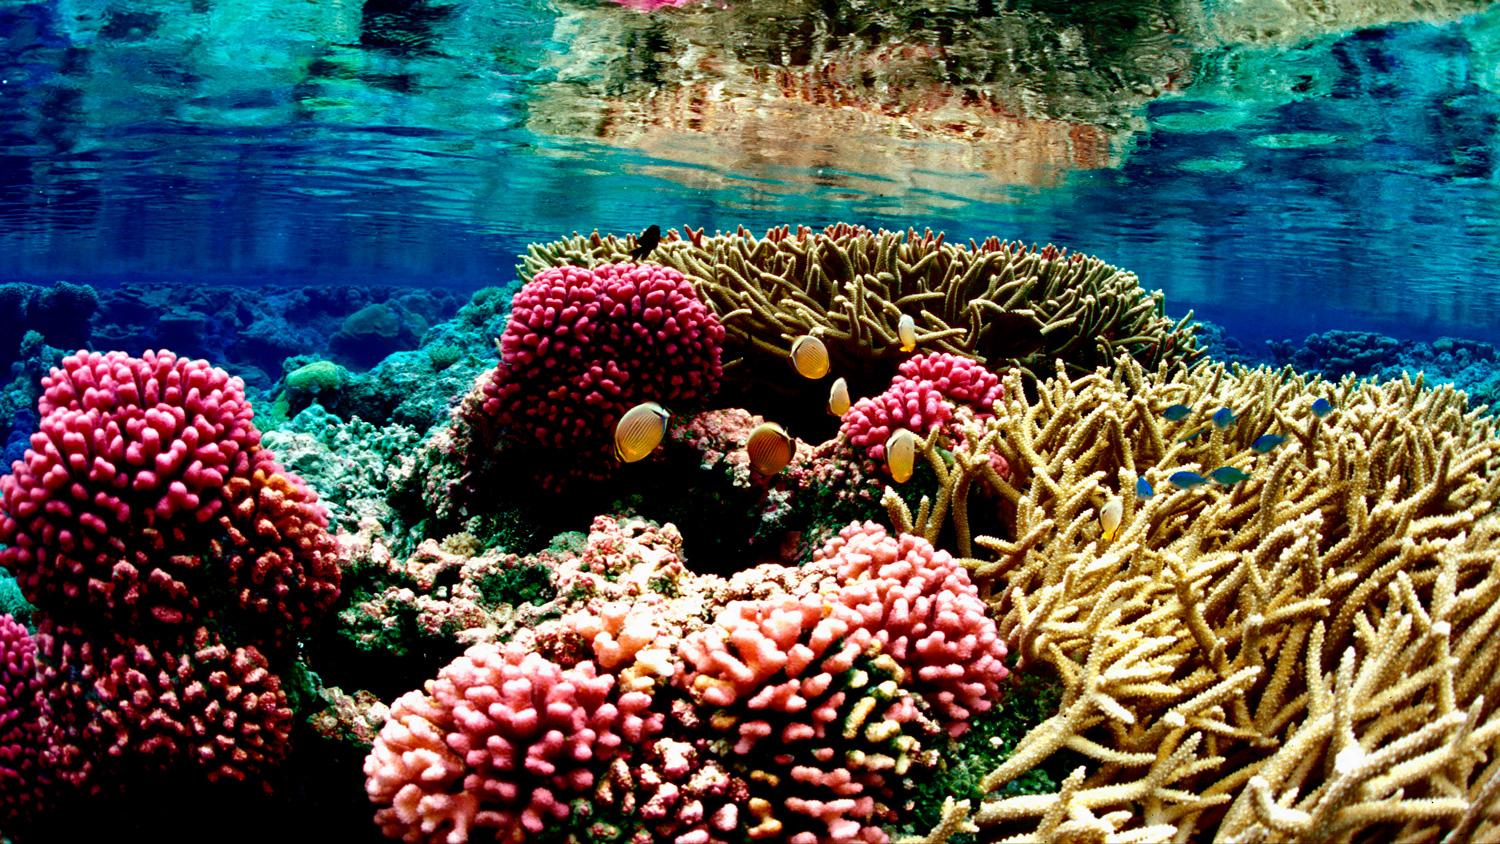 Photograph of a modern coral reef ecosystem.